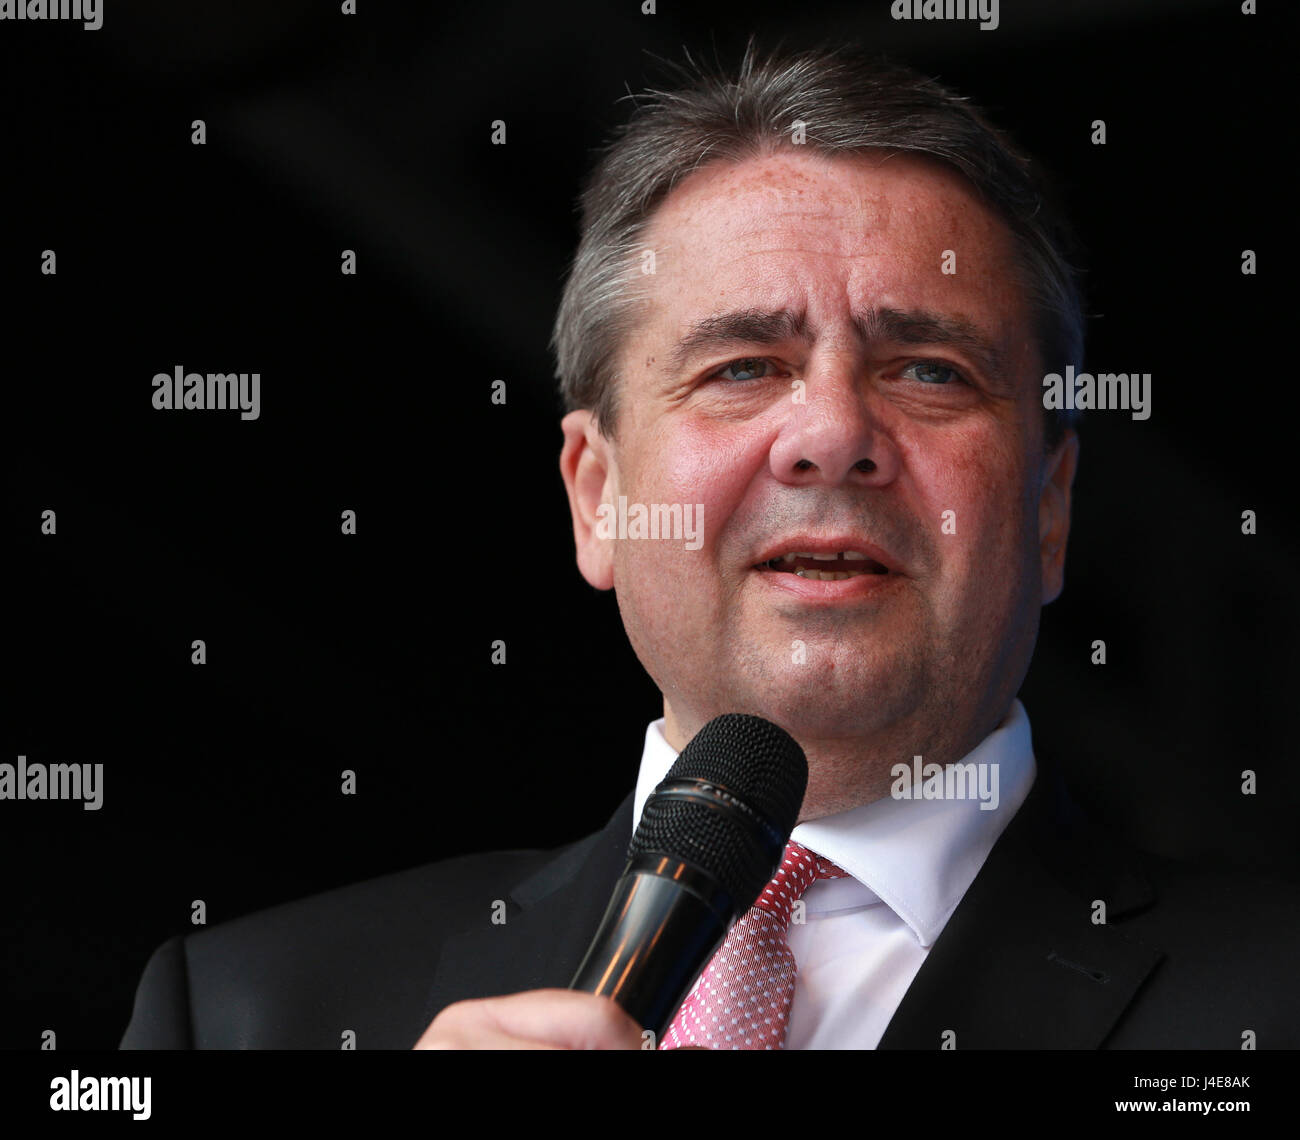 Duisburg, Germany. 13th May, 2017. Sigmar Gabriel, Vice Chancellor and Foreign Minister of Germany, speaks at the final SPD campaign rally for the North Rhine-Westphalia state elections in Duisburg, Germany, on May 12, 2017. (Xinhua/Luo Huanhuan) Credit: Xinhua/Alamy Live News Stock Photo